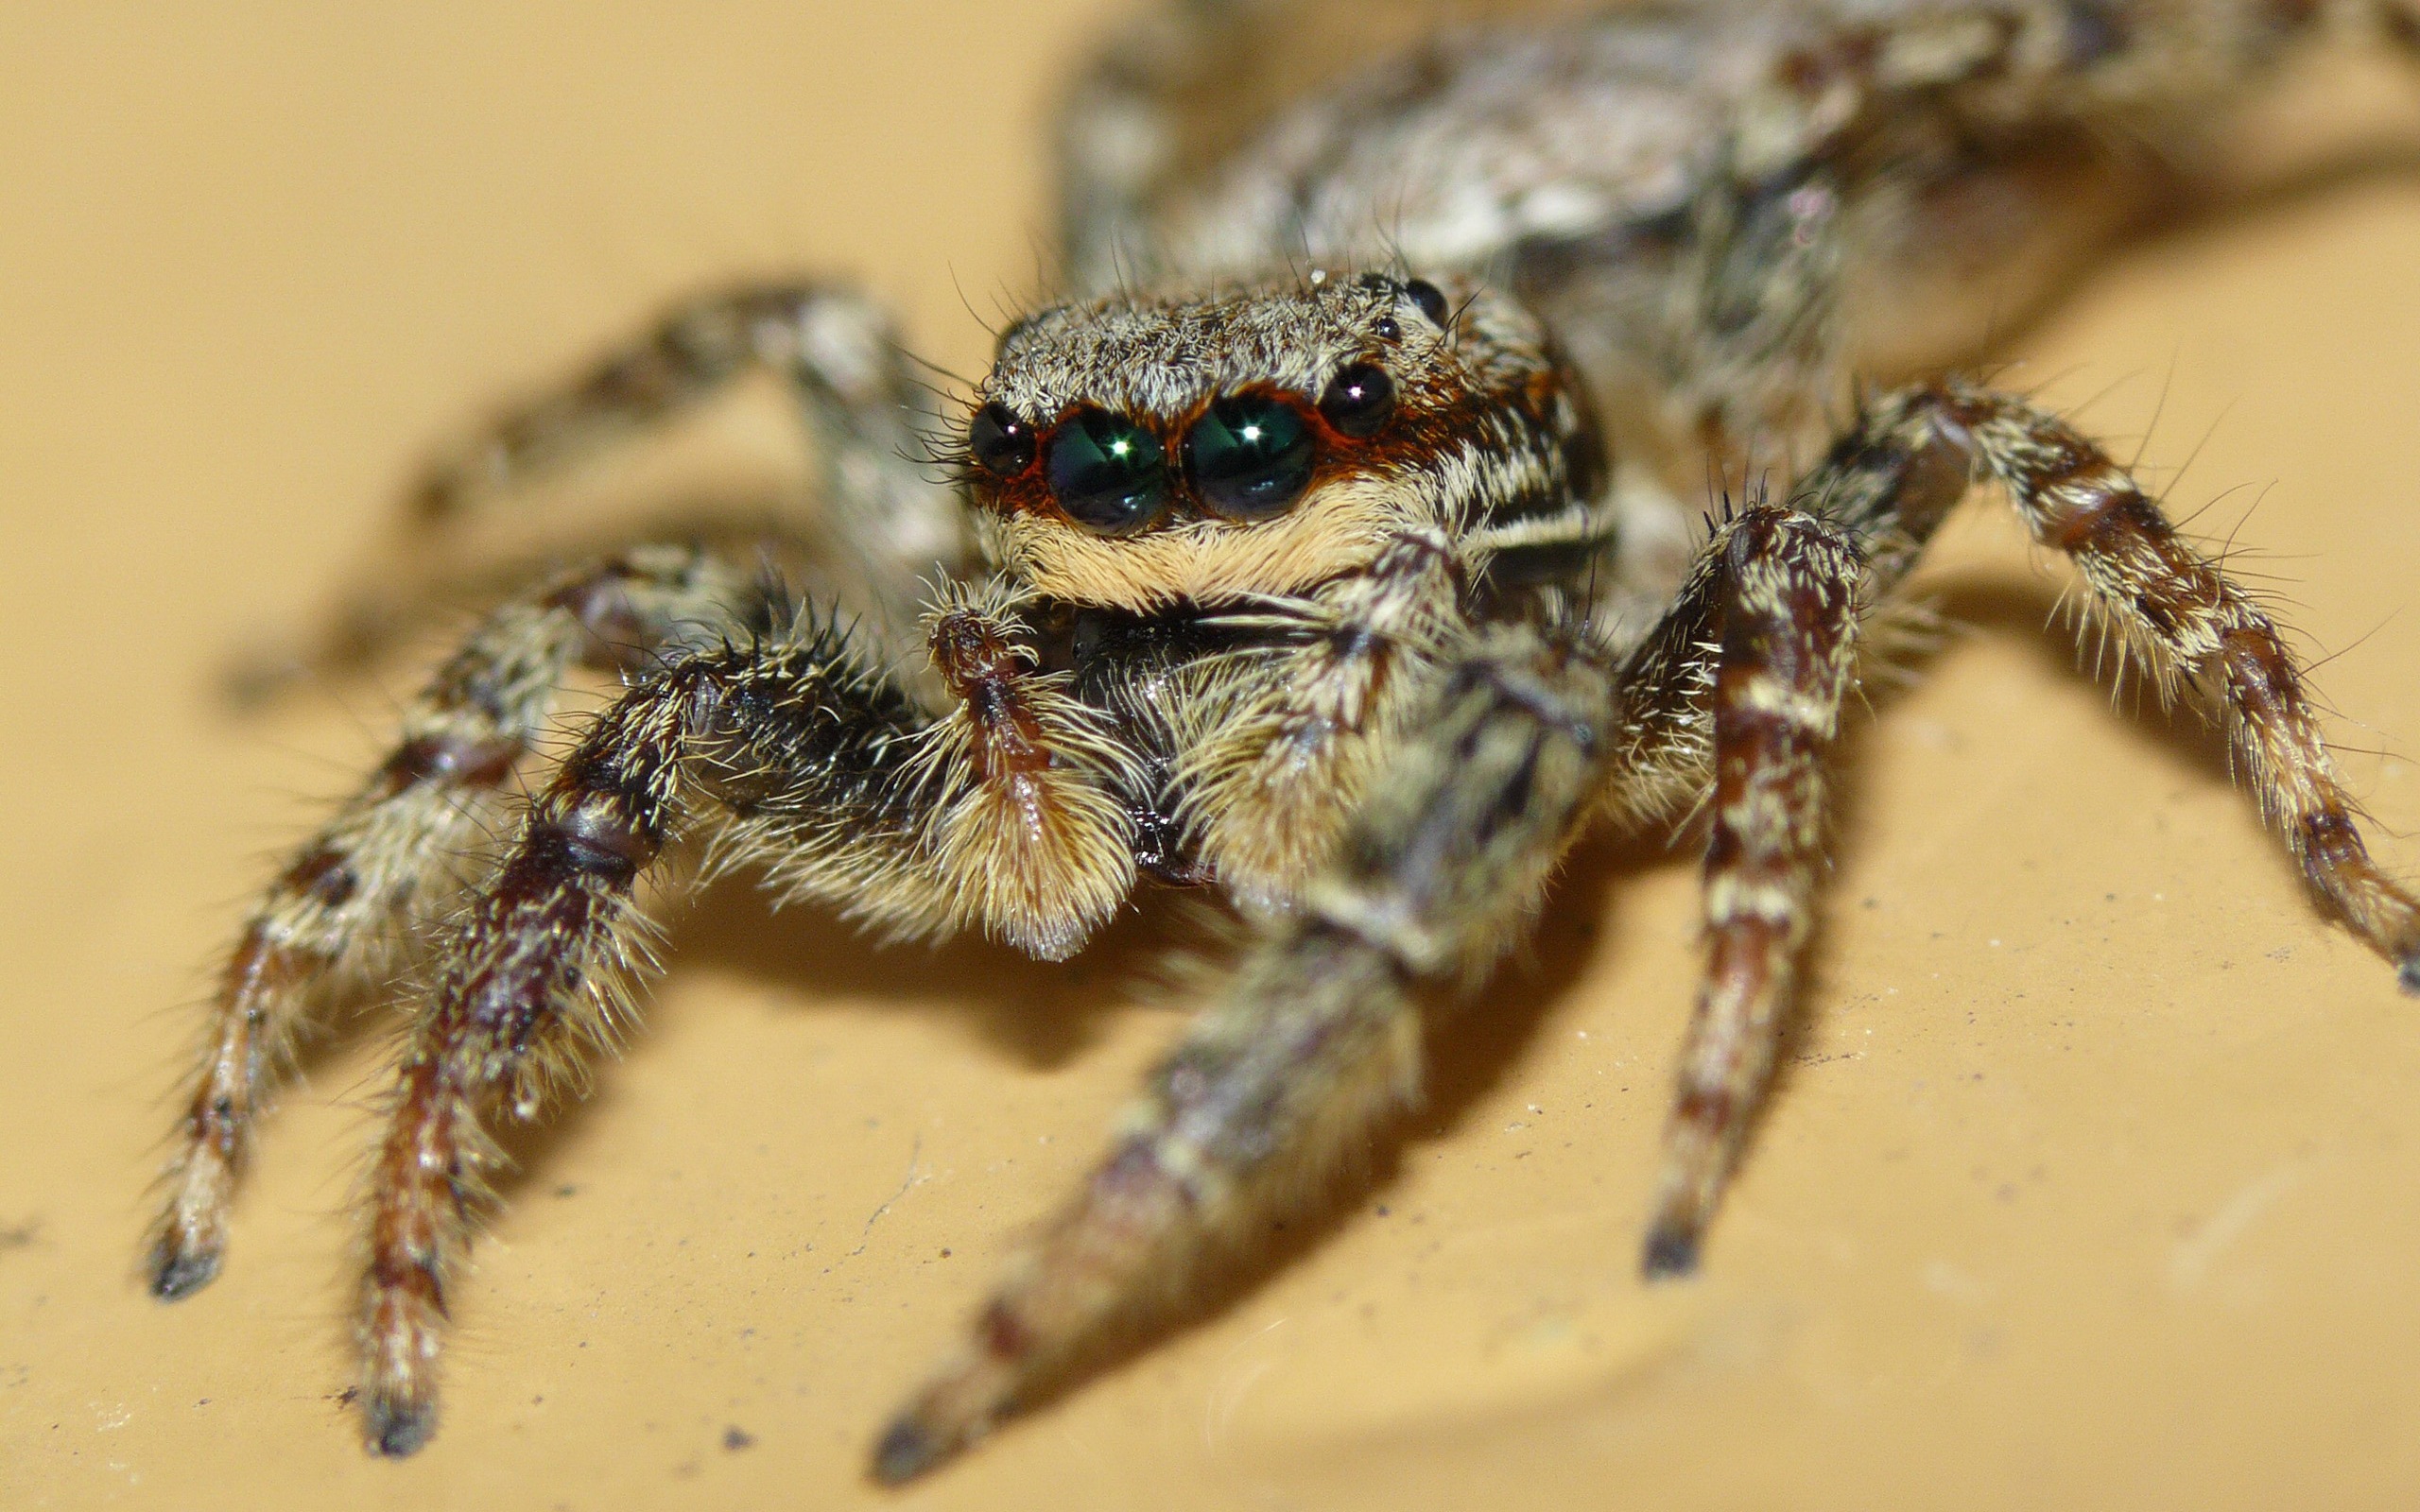 Jumping Spider 2560x1600